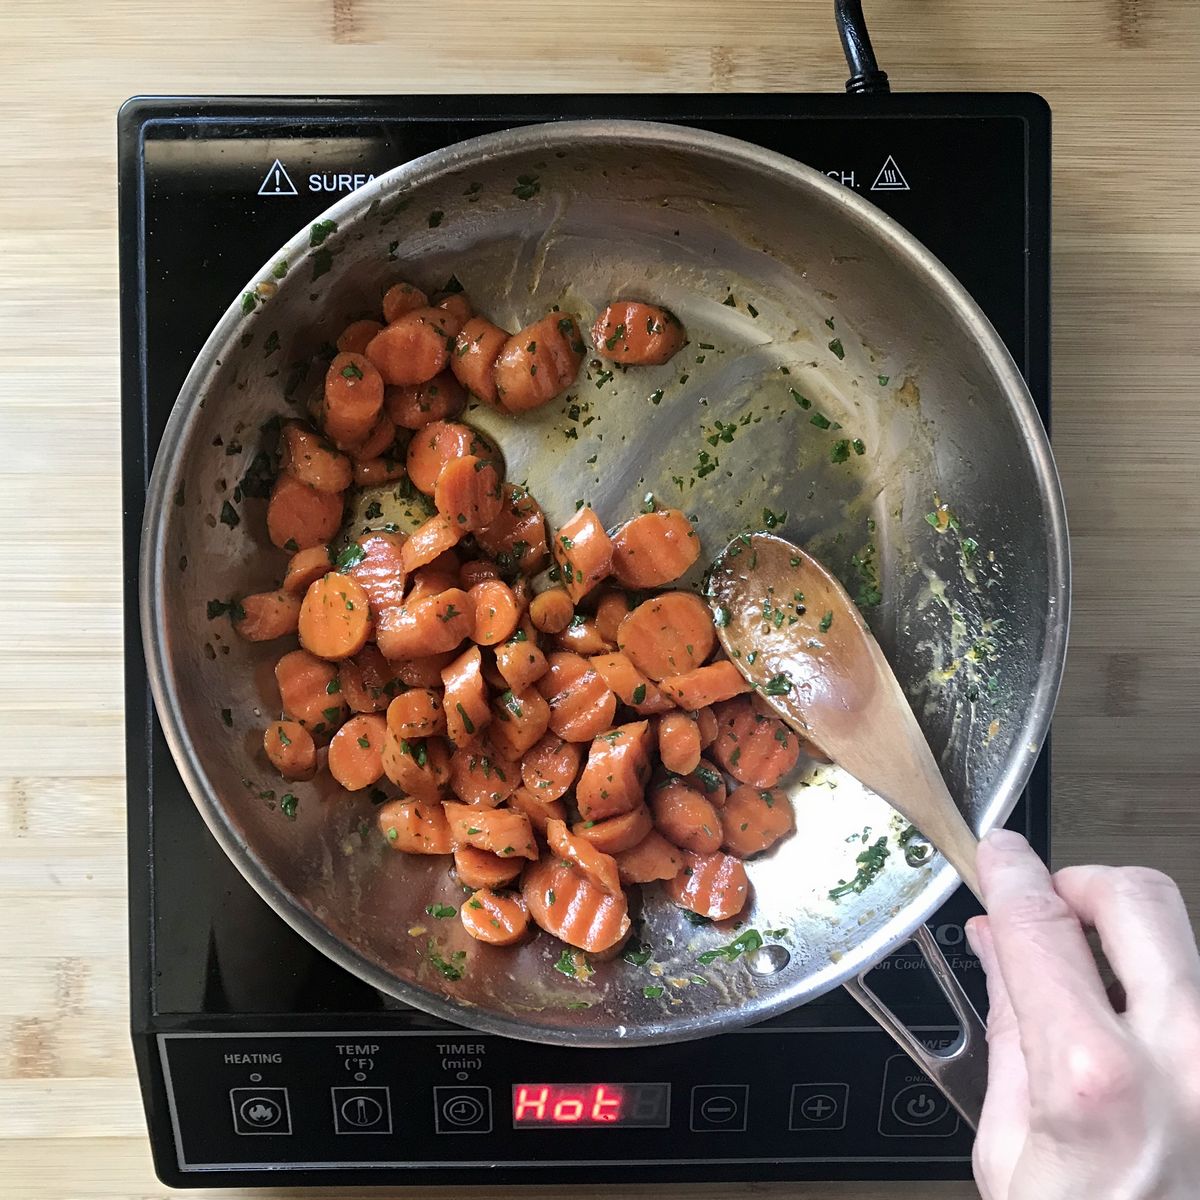 Chopped Italian parsley added to glazed carrots in a pan.